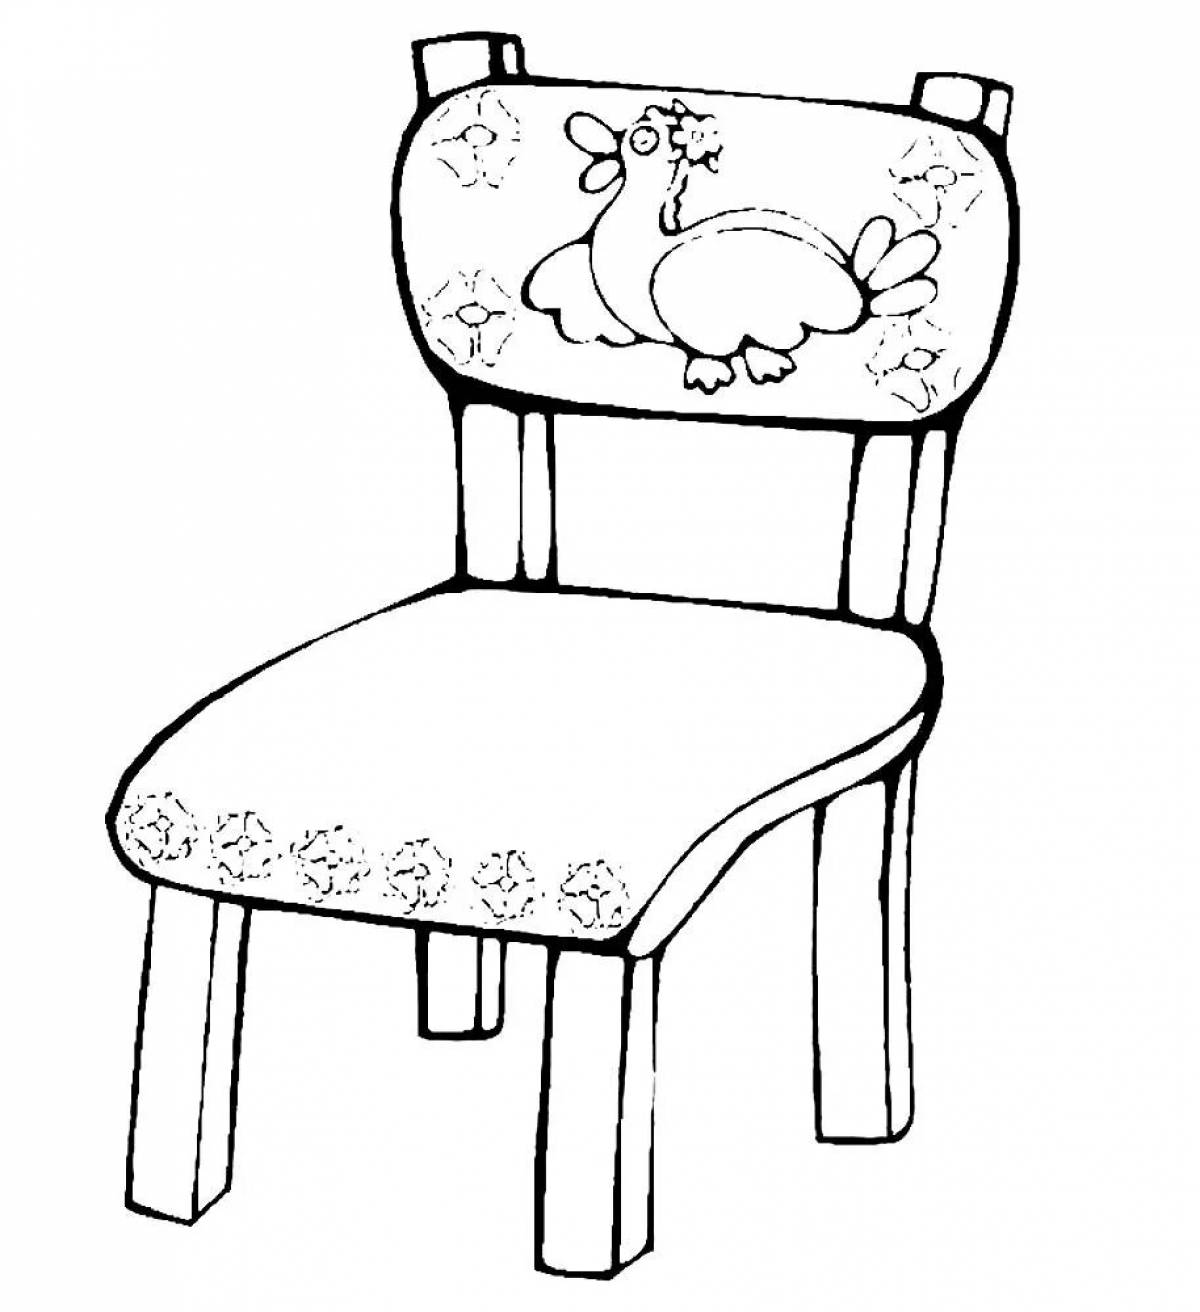 Fancy stool coloring page